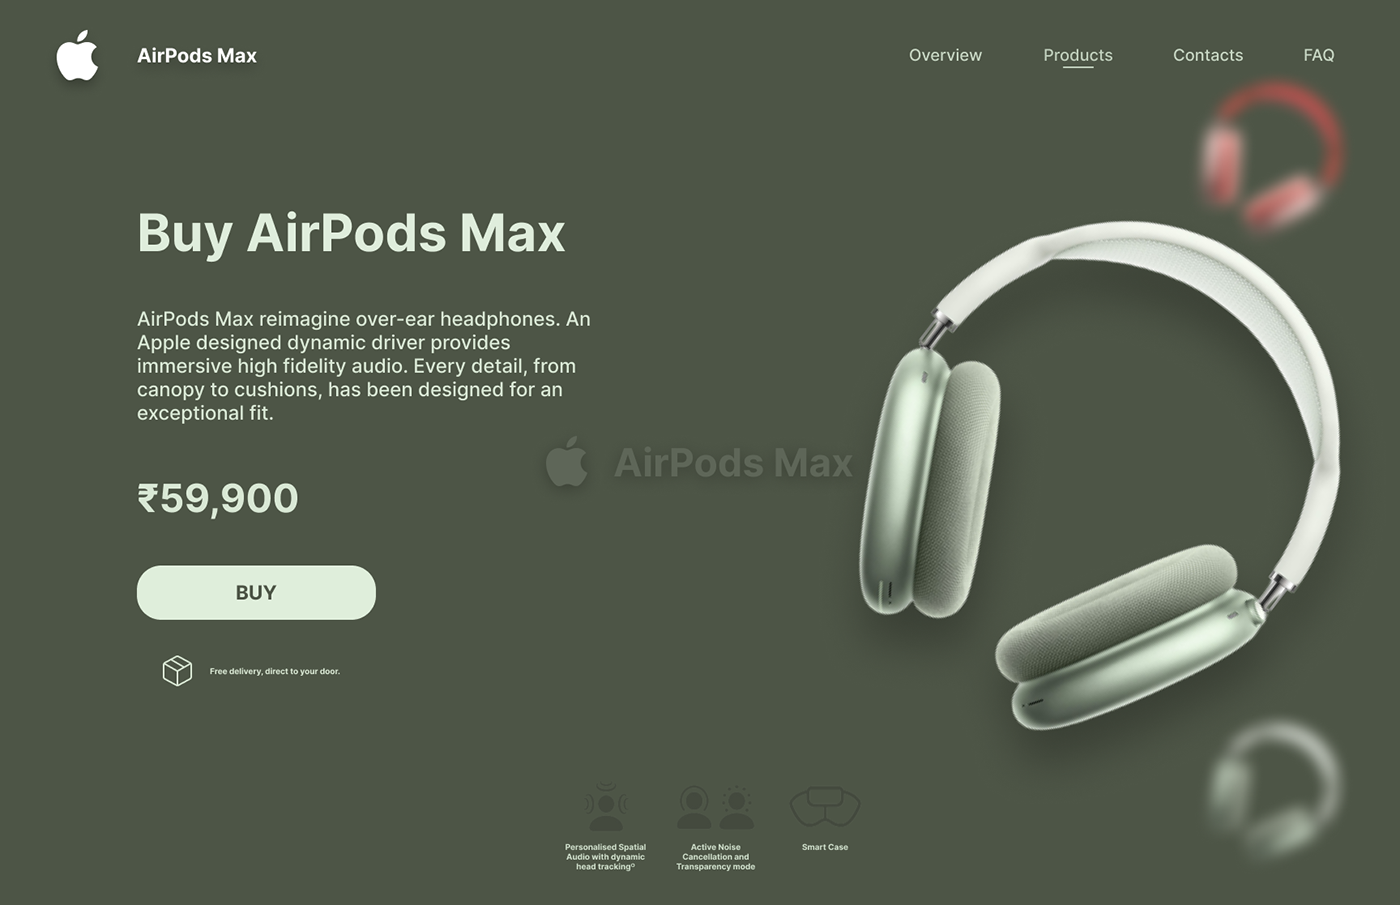 airpods MAX UI ux user experience landing page AirPods Max apple